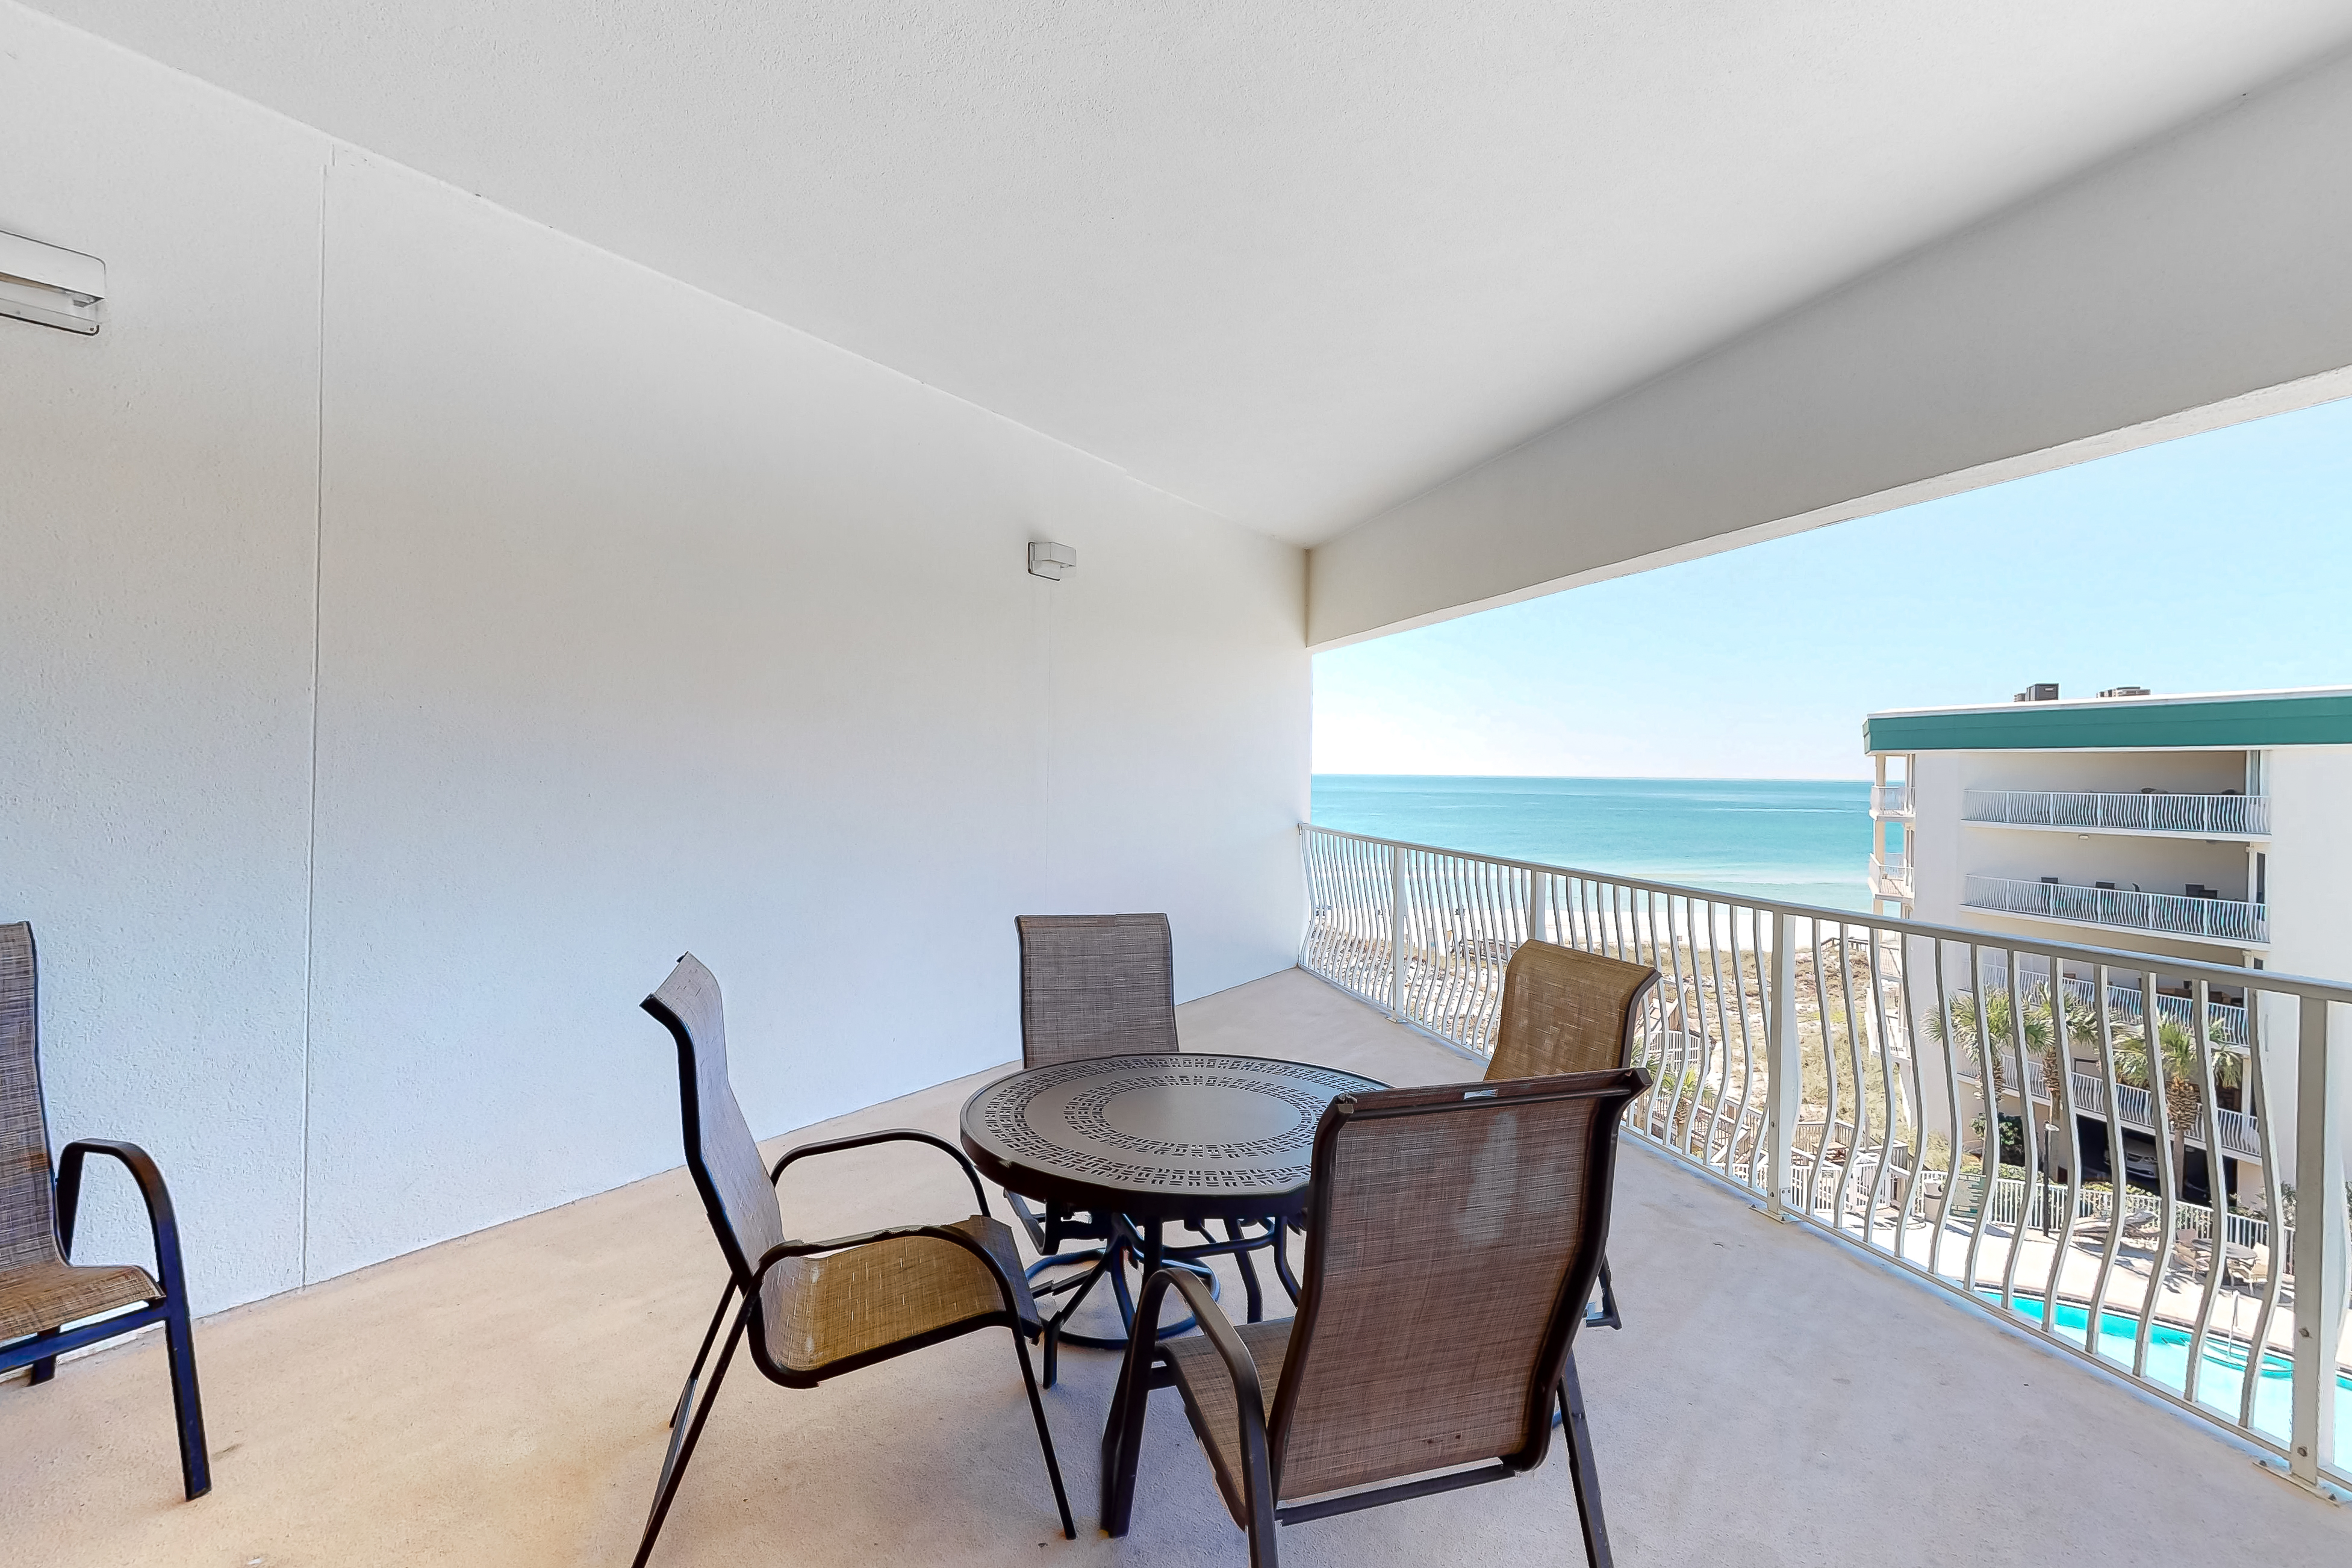 Dunes of Seagrove A404 Condo rental in Dunes of Seagrove in Highway 30-A Florida - #19